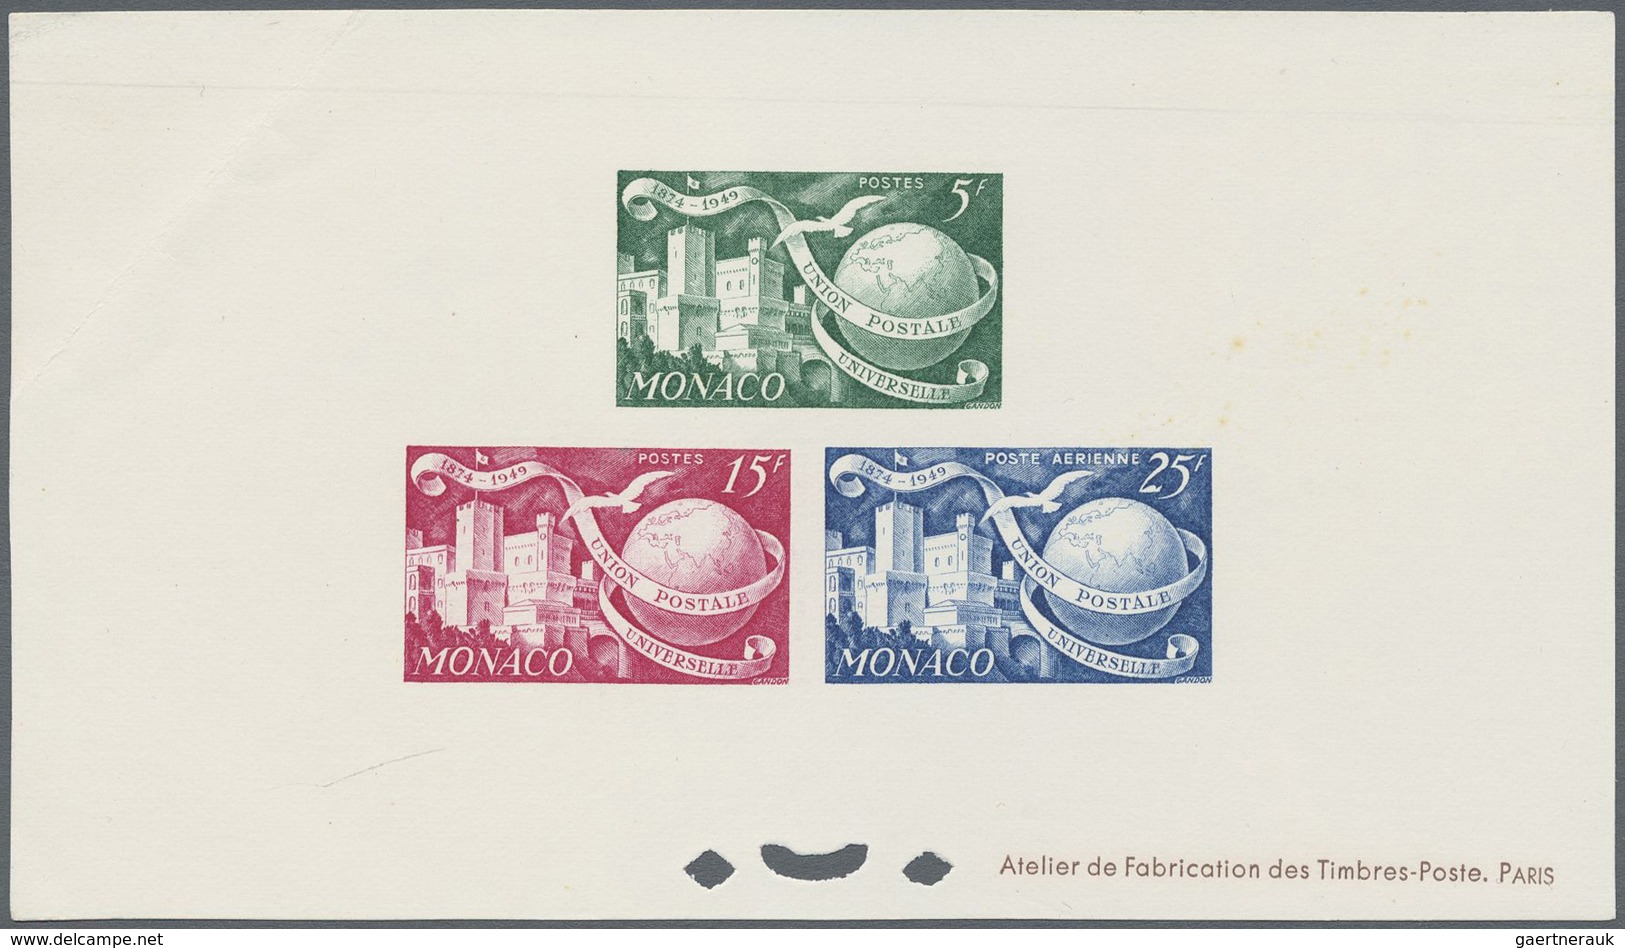 **/* Monaco: 1920/1990, sophisticated balance of mint material on album pages (partly in slight disarray)